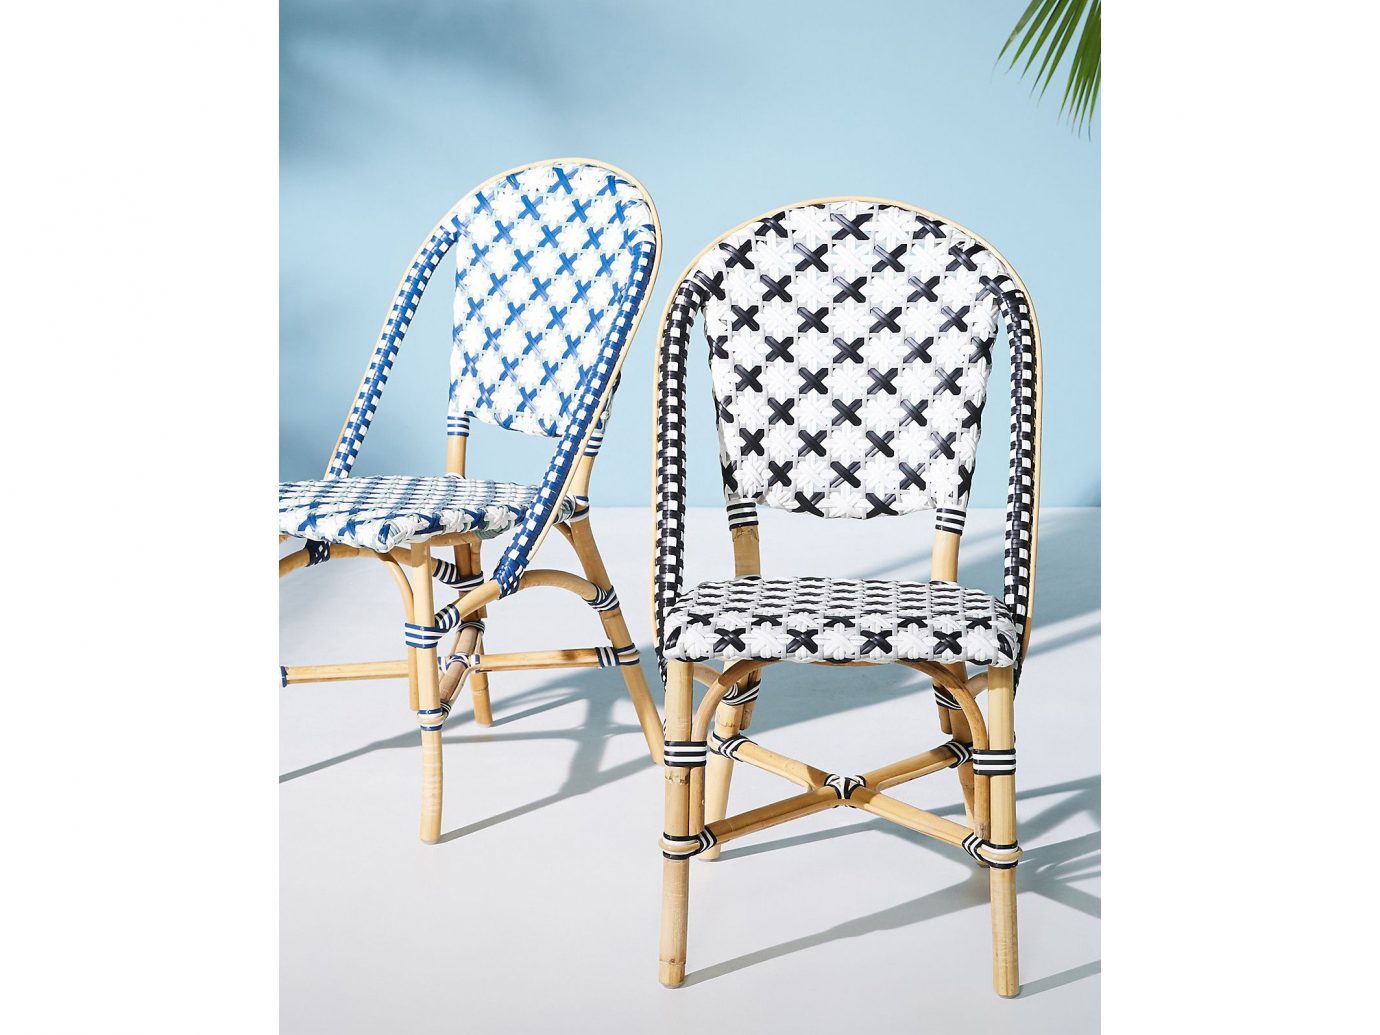 Style + Design Travel Shop furniture chair outdoor furniture product design product table